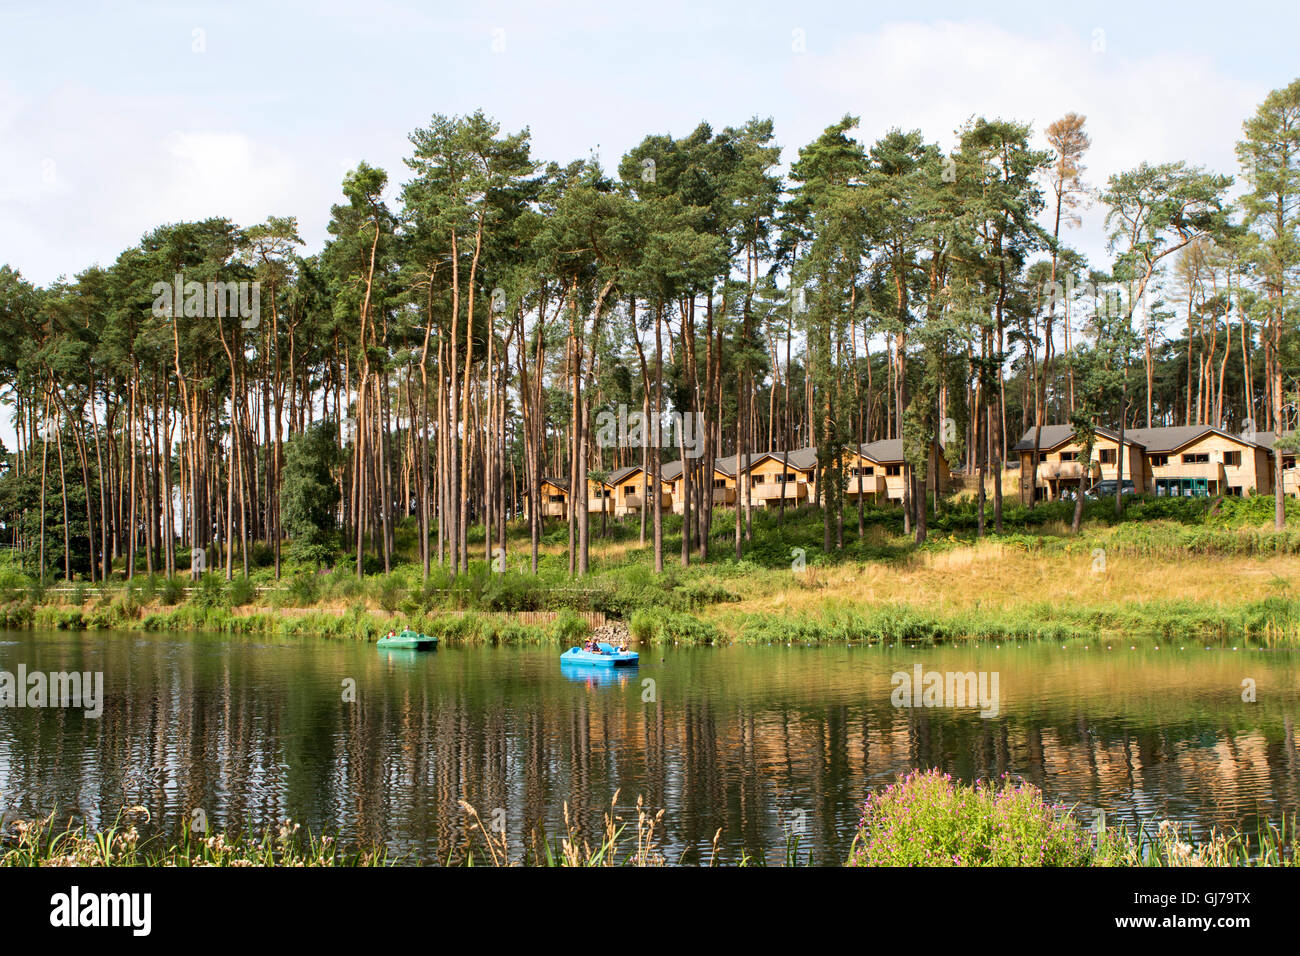 Center Parcs Woburn Forest, the newest holiday village of Center Parcs UK, located in Bedfordshire  UK Stock Photo